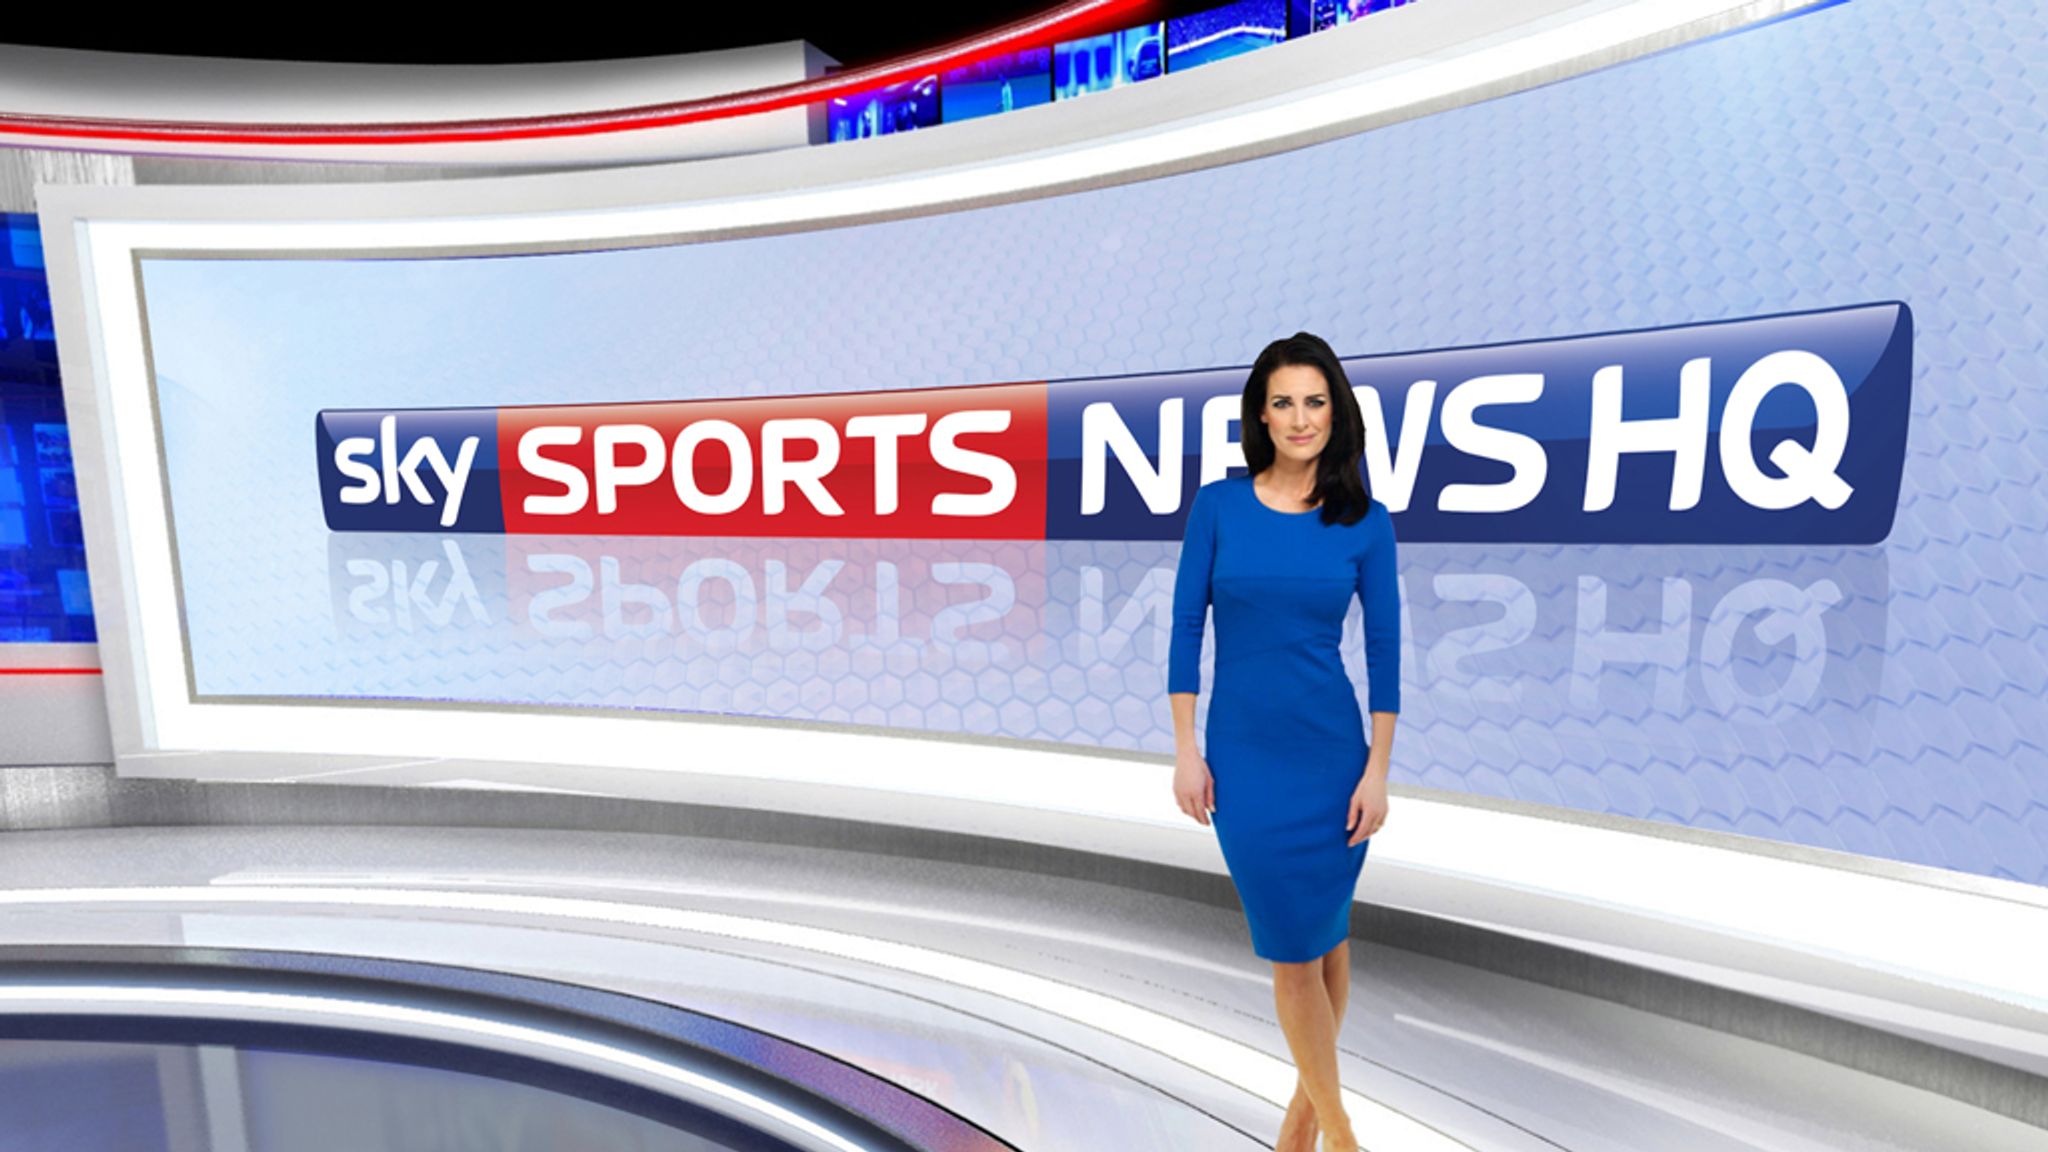 Sky Sports News HQ will launch on August 12 on the new channel of 401 |  News News | Sky Sports